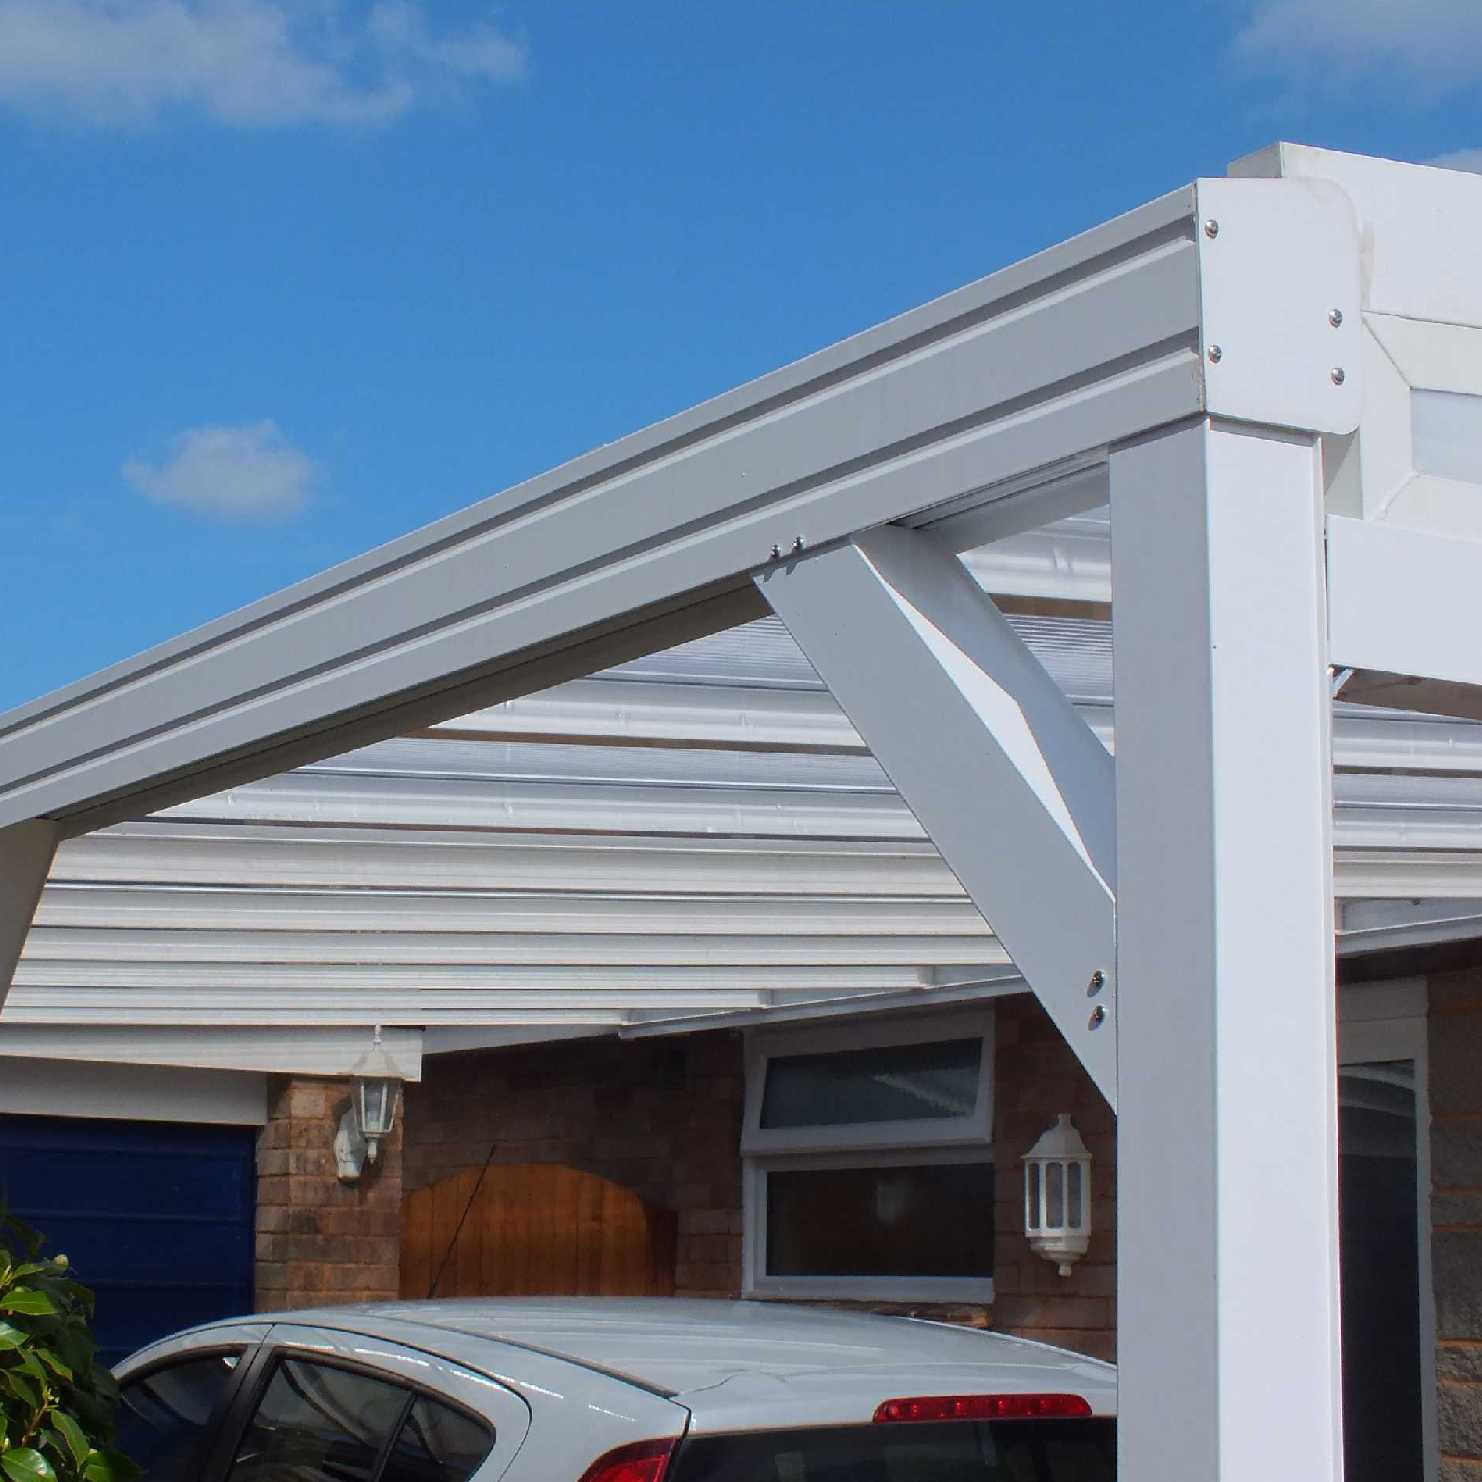 Buy Omega Smart Lean-To Canopy, White with 16mm Polycarbonate Glazing - 12.0m (W) x 2.0m (P), (5) Supporting Posts online today